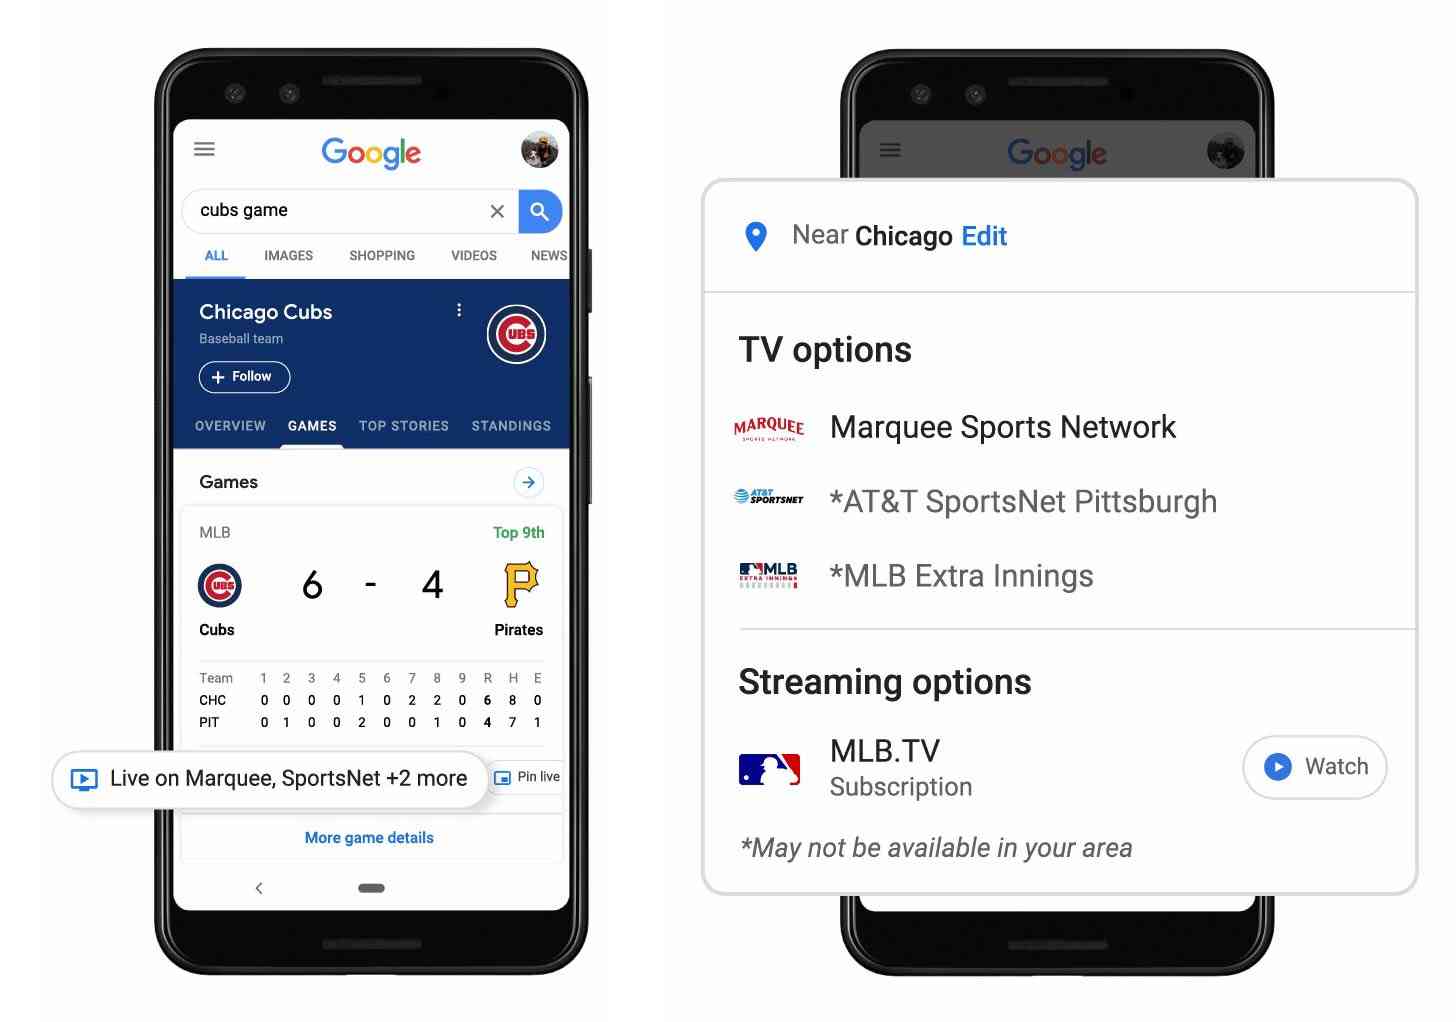 Google Search sports live TV channels